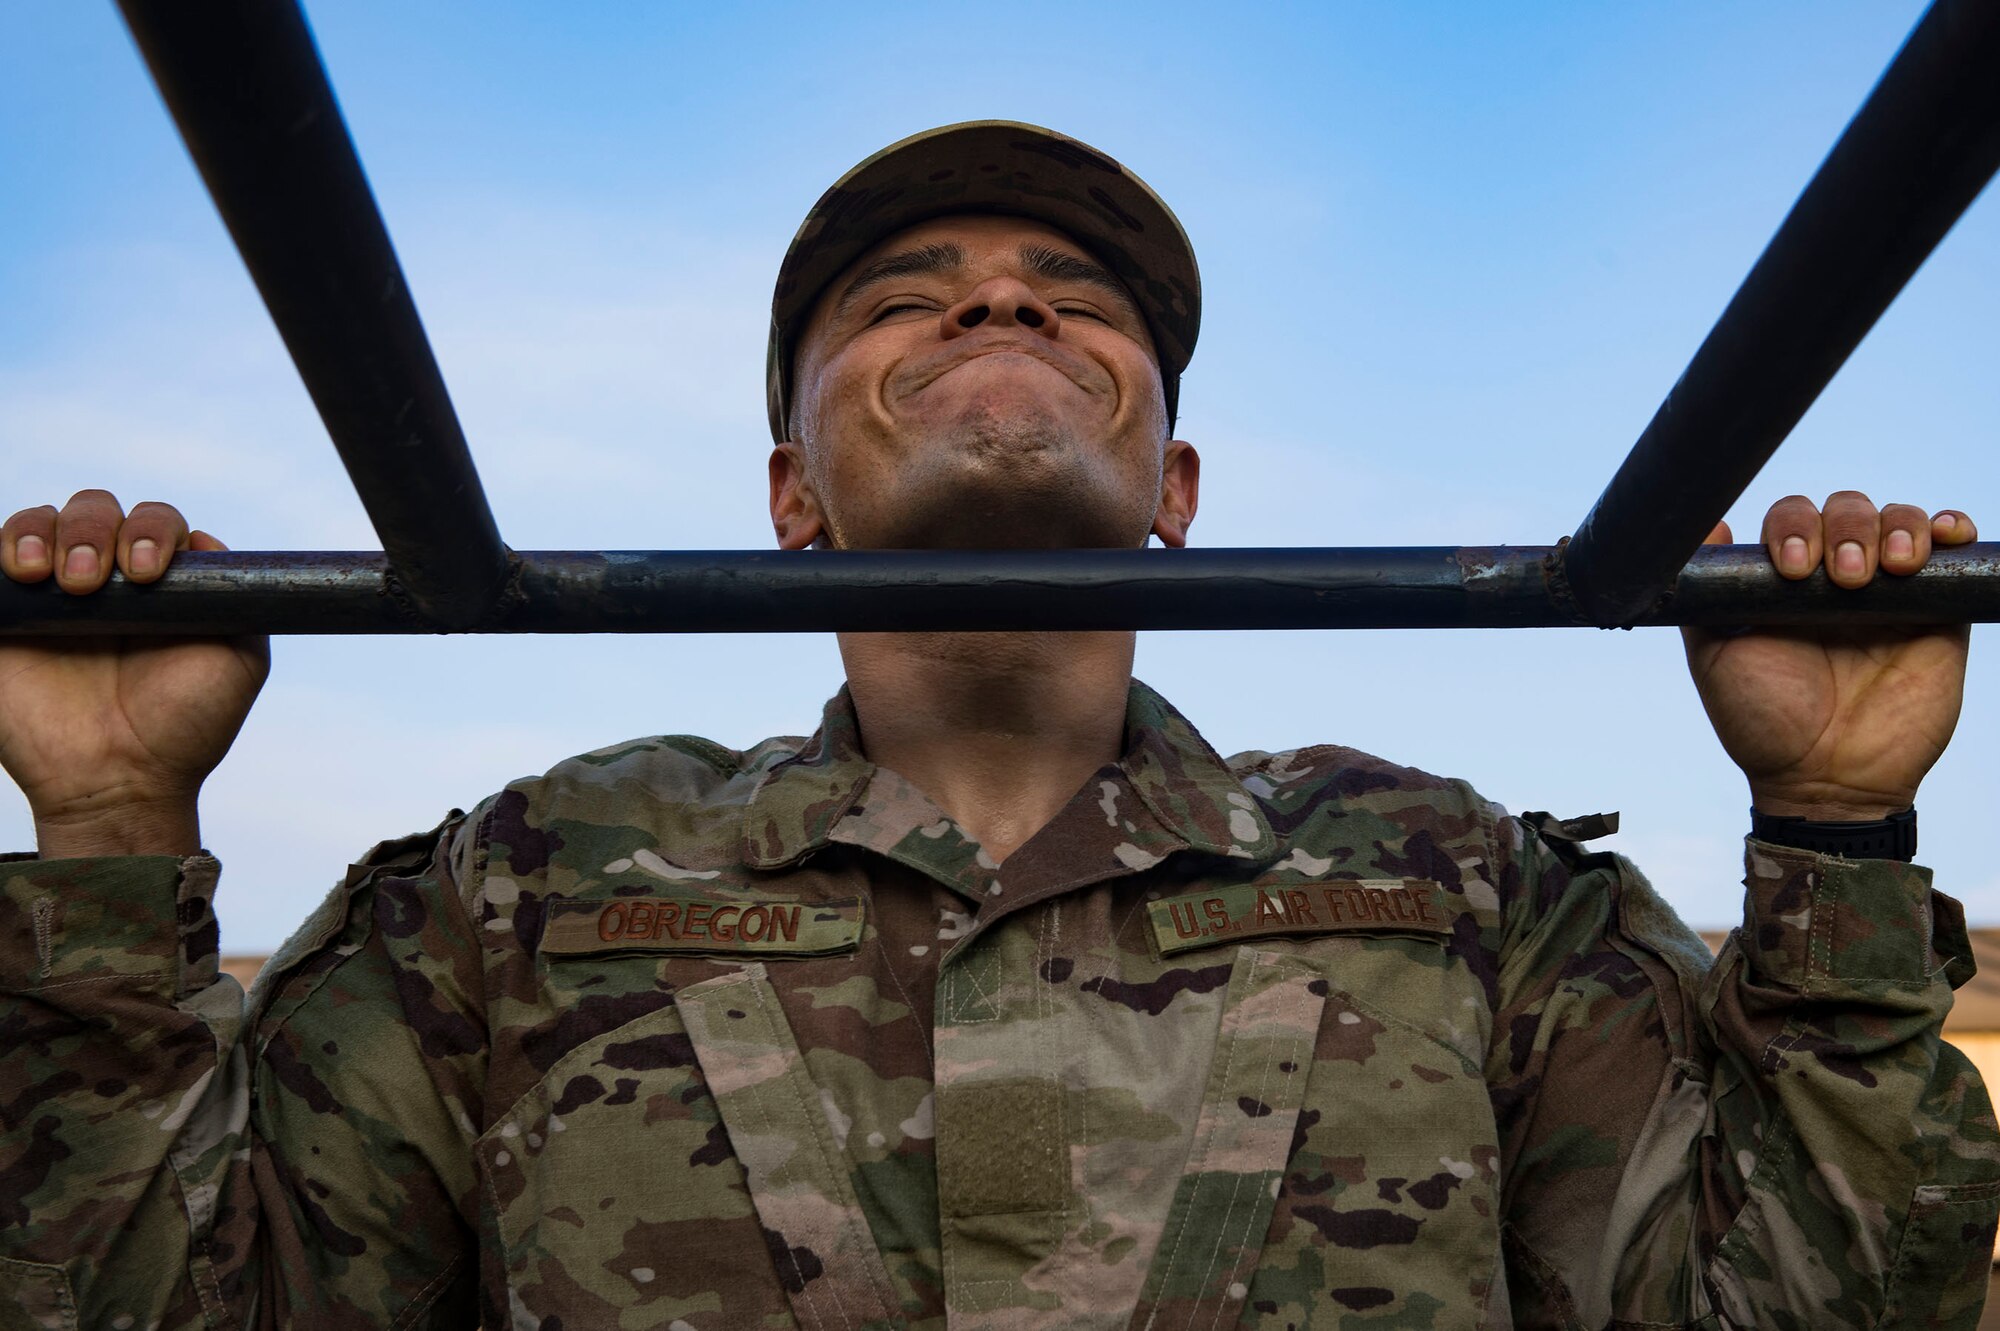 Tech. Sgt. Jose Obregon, 347th Operations Support Squadron independent duty medical technician, performs pull ups during a Pre-Ranger Assessment Course, Aug. 24, 2018, at Moody Air Force Base, Ga. Moody’s 93d Air Ground Operations Wing hosted the three-day assessment which challenged approximately 20 Airmen from the 93d AGOW and 23d Wing on their physical fitness, land navigation skills, leadership qualities, water confidence and academic and tactical abilities under duress. The evaluation is designed to determine whether Airmen are ready to attend the Air Force Ranger Assessment Course held at Fort Bliss, Texas. (U.S. Air Force photo by Senior Airman Greg Nash)